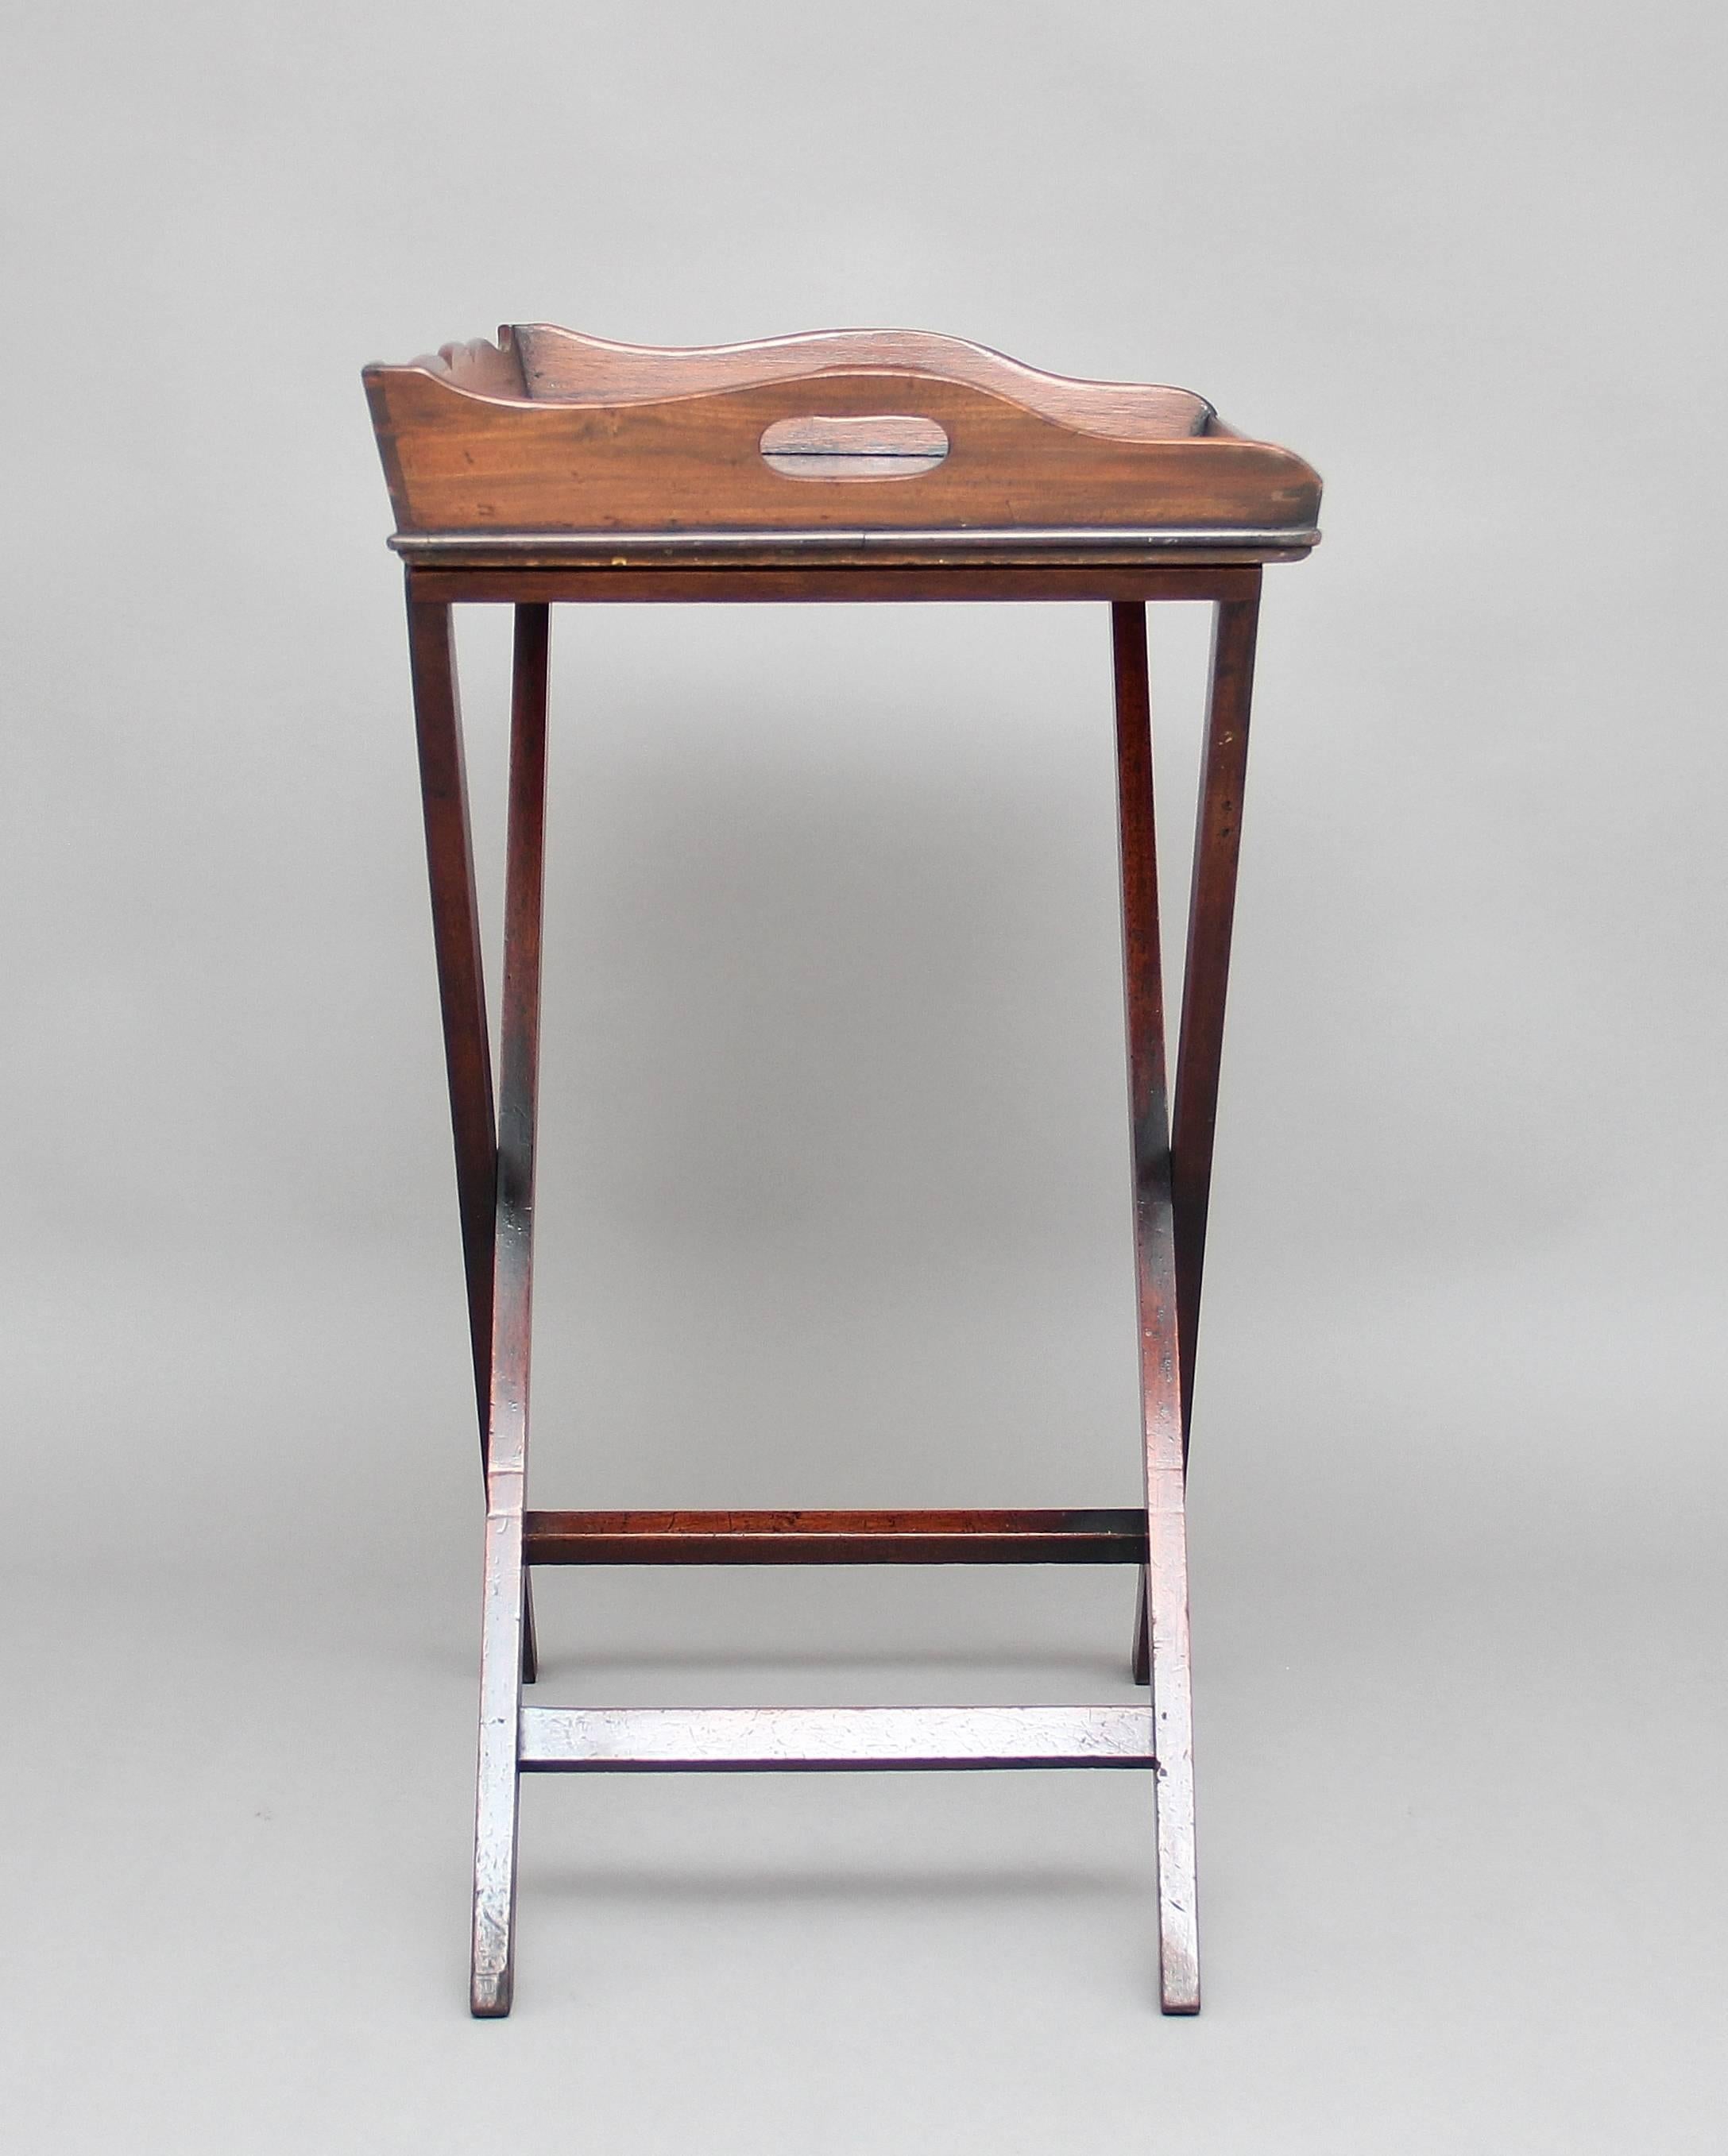 A lovely quality 19th century mahogany butlers tray on stand, the rectangular shaped tray with a surround gallery three quarters raised and with two fret cut carrying handles above a folding stand, circa 1830.